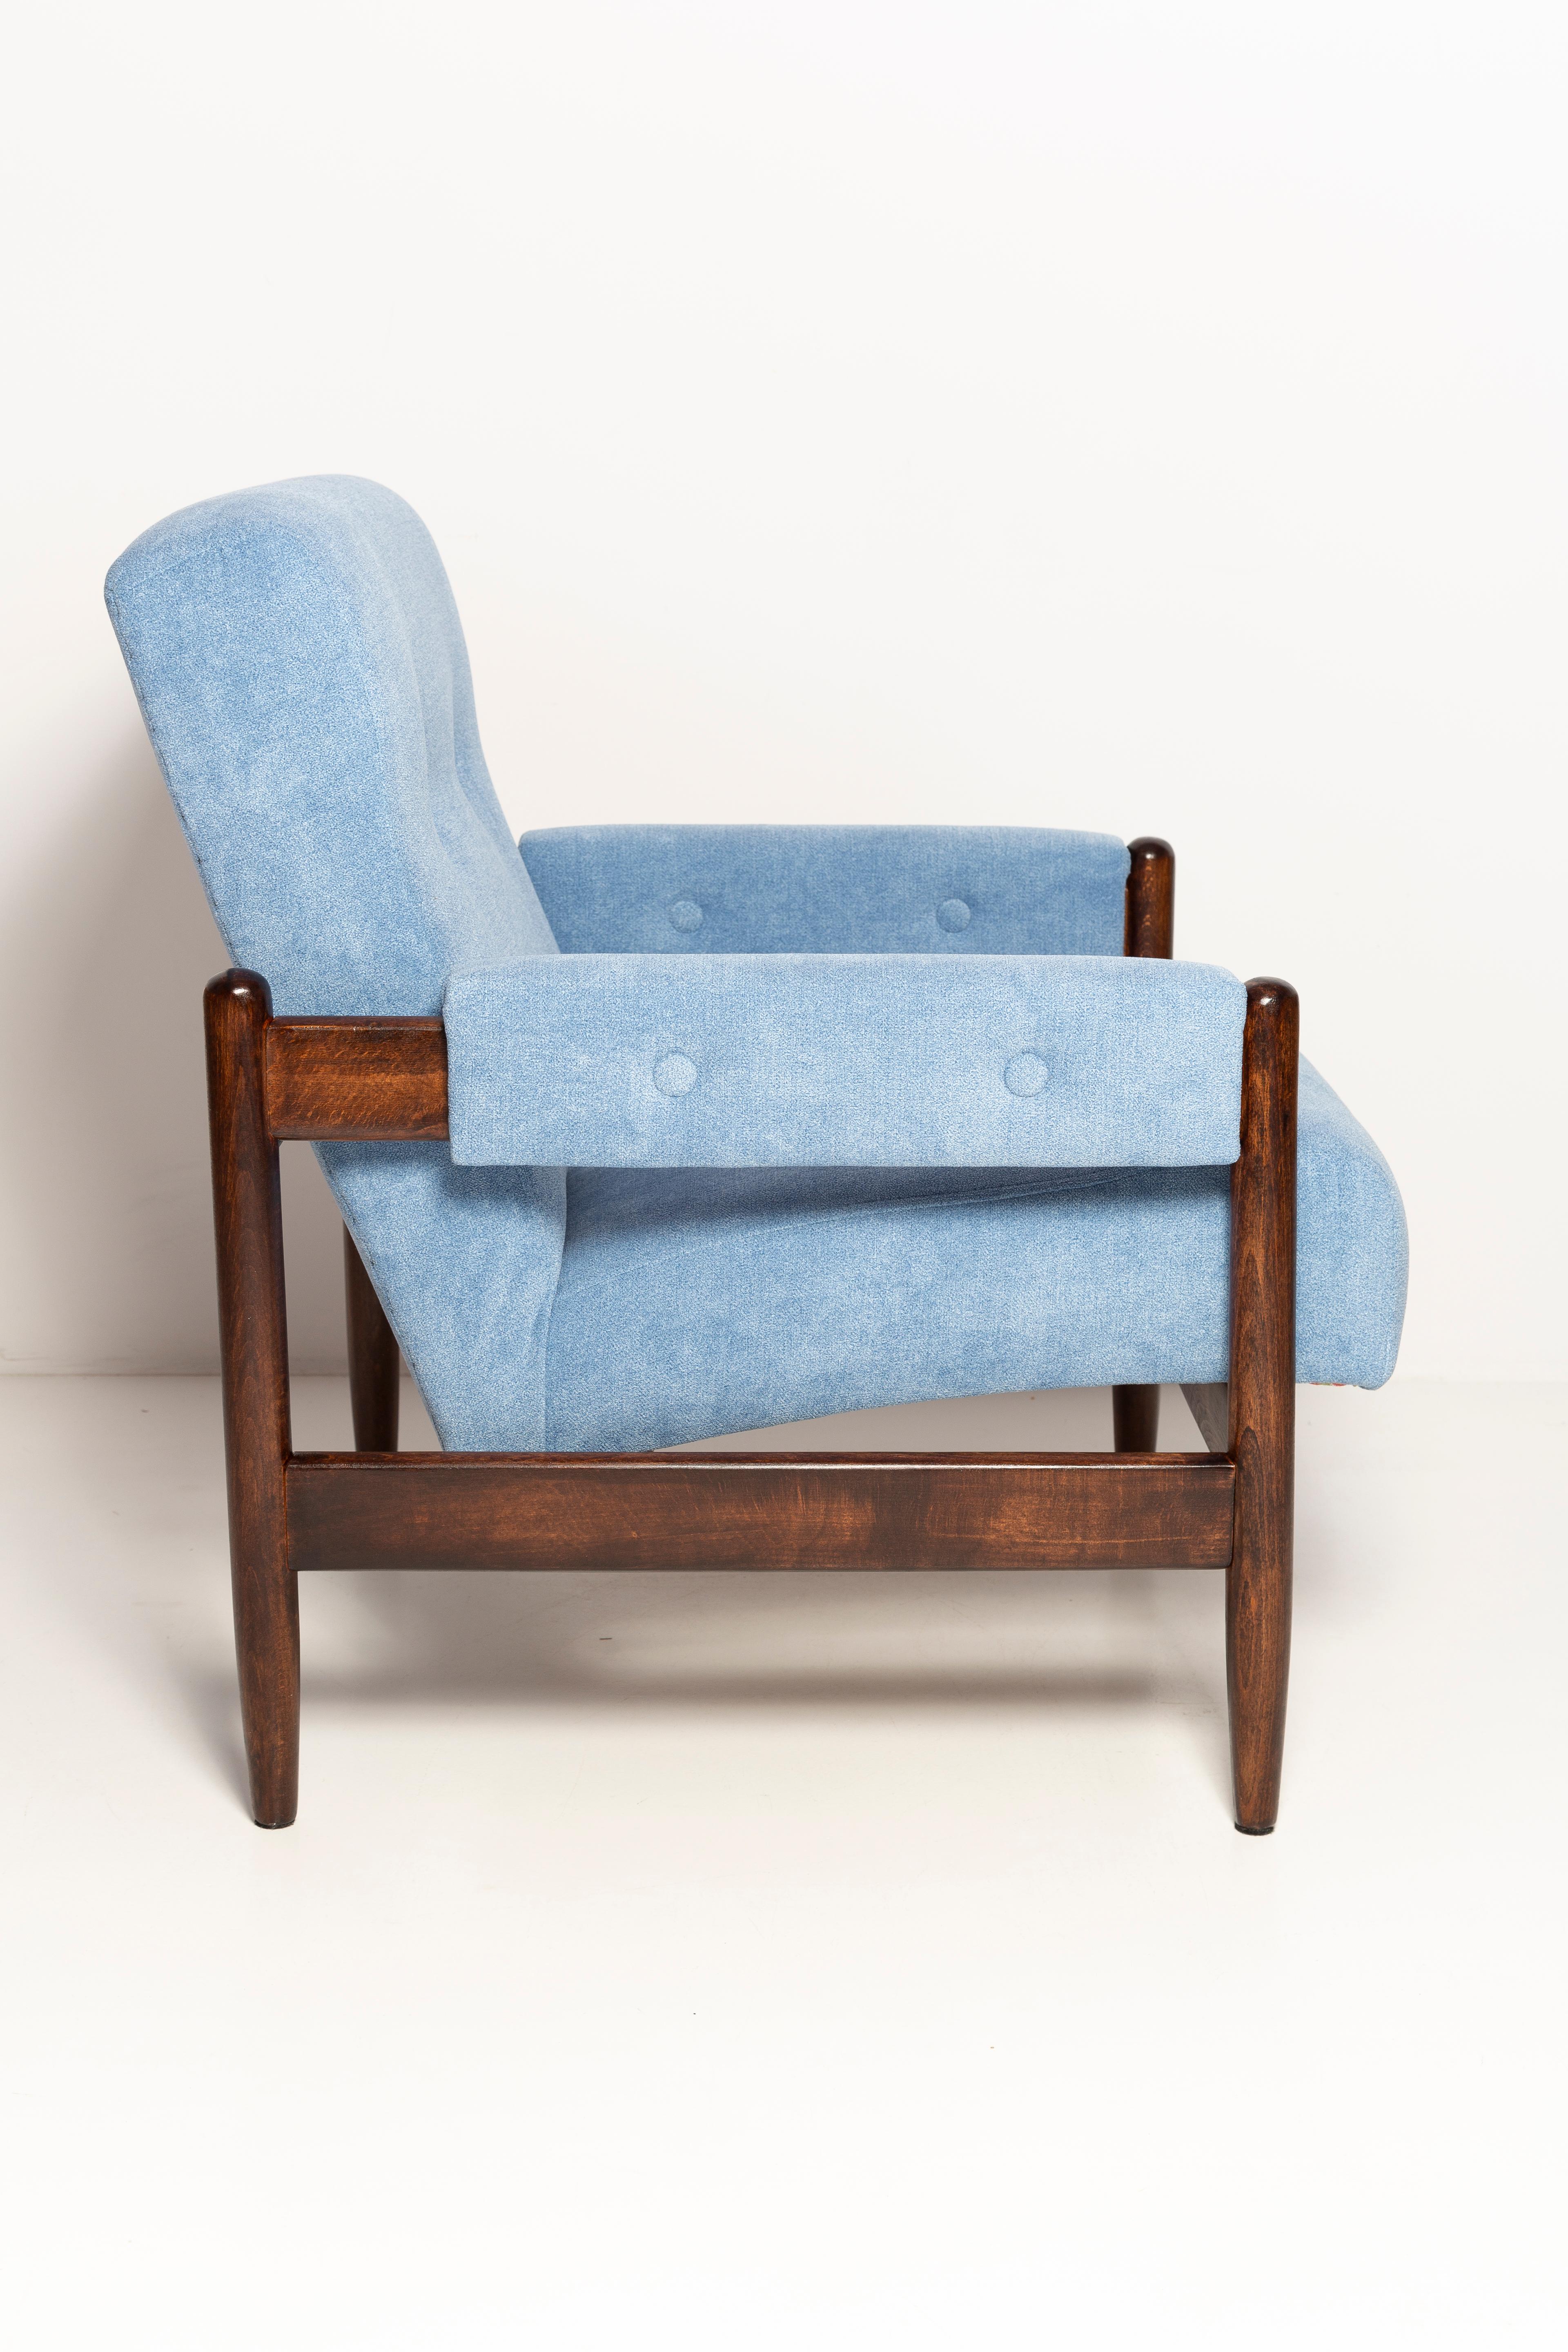 Textile Set of Two Mid Century Blue Velvet Vintage Armchairs, Walnut Wood, Europe, 1960s For Sale